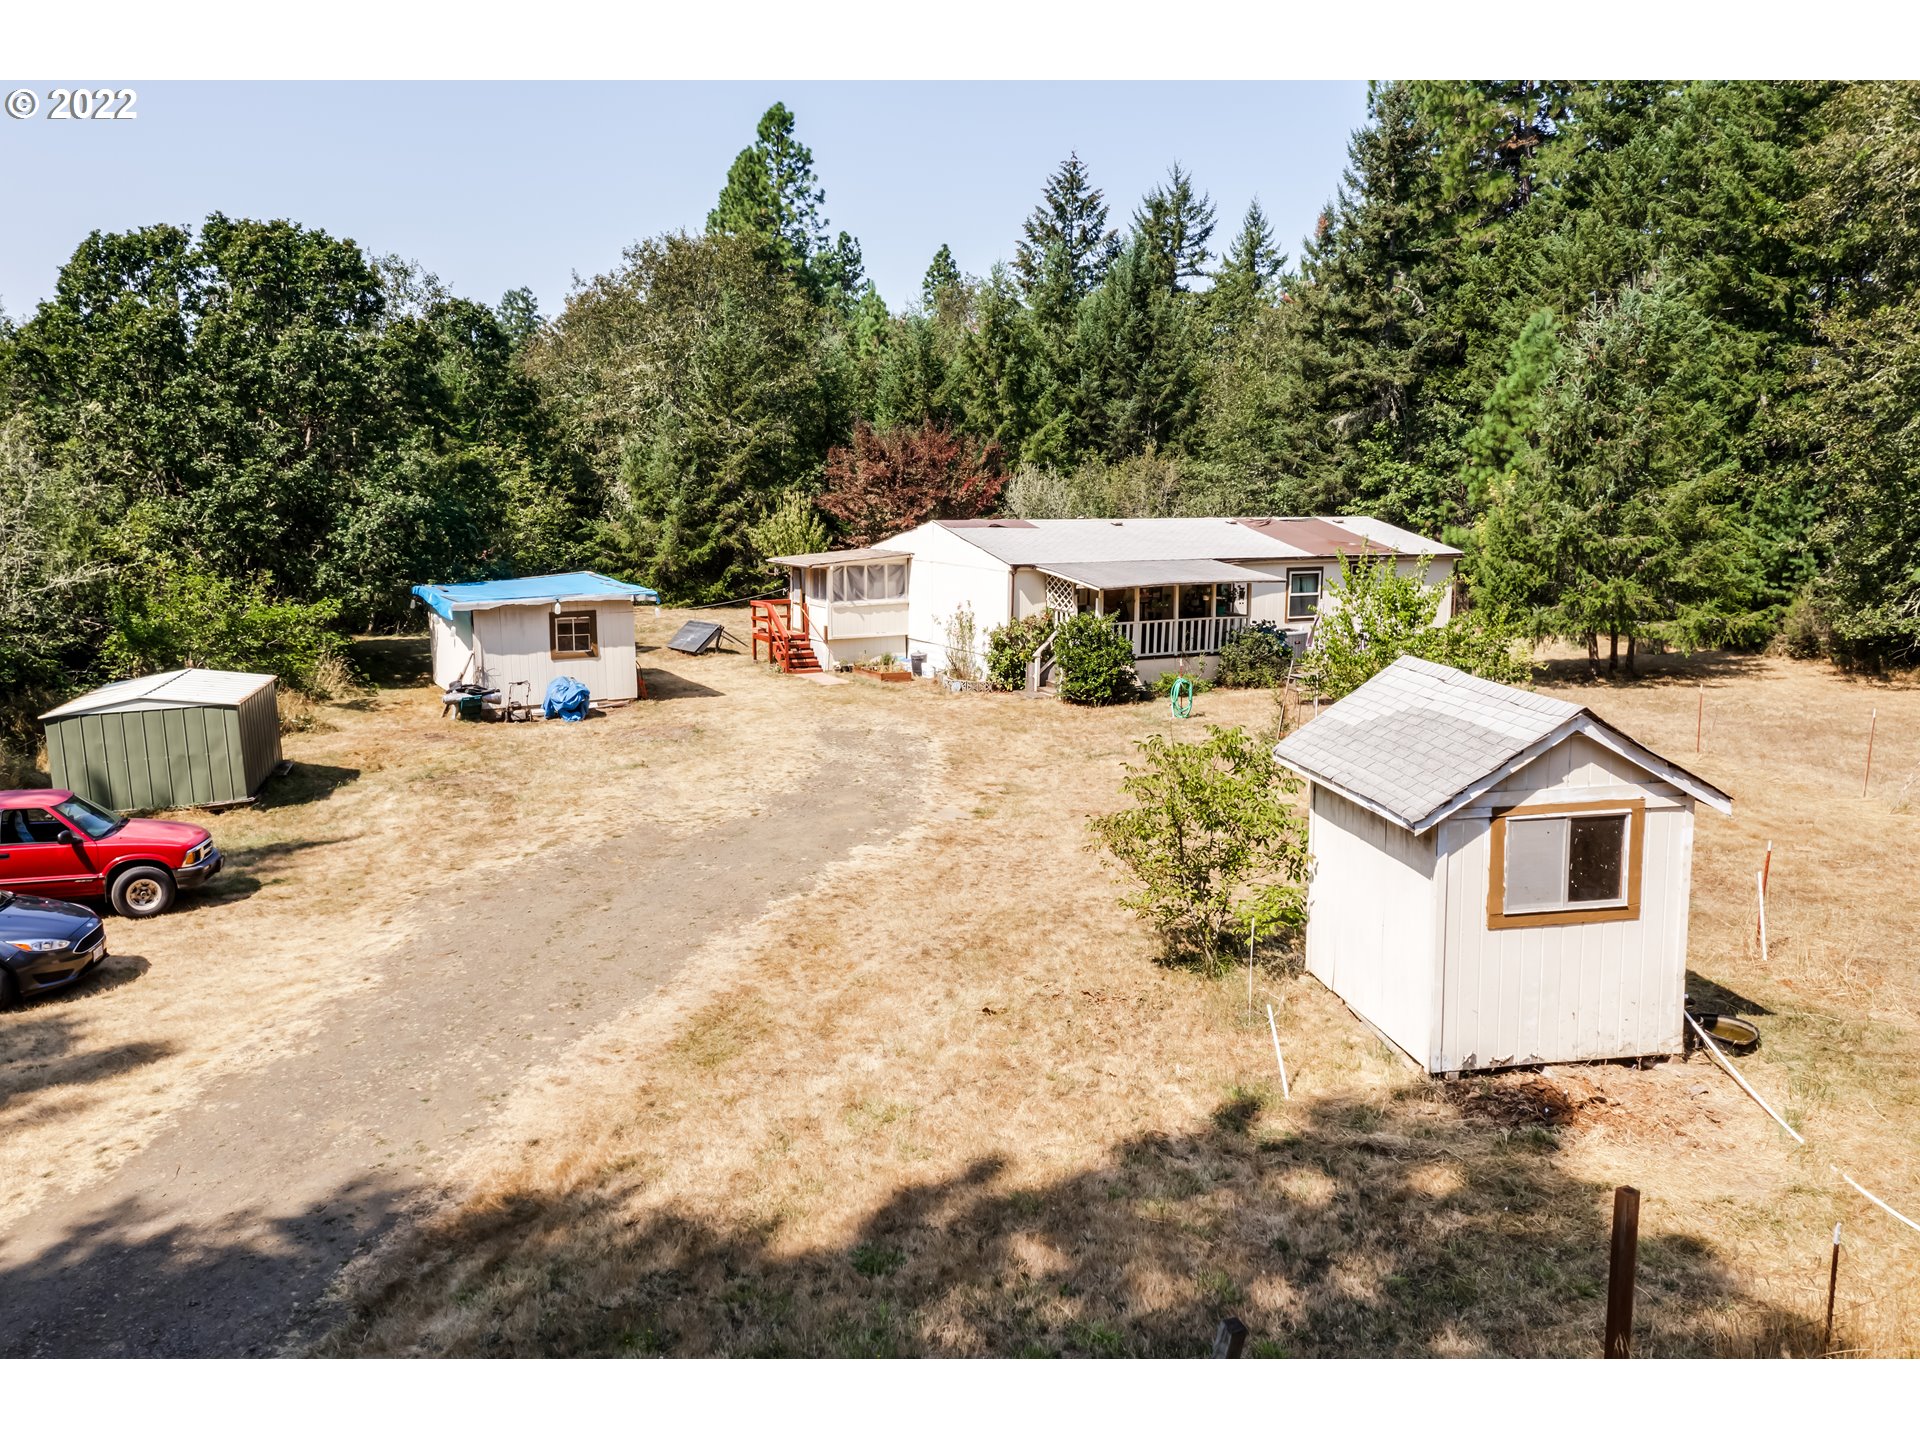 Over 4.5 Acres privately tucked away and hidden in the trees.  Private Country feeling and still just minutes from Eugene with Down Town Veneta just down the road. Live in the Manufactured Home, while you build your Beautiful Dream Home.